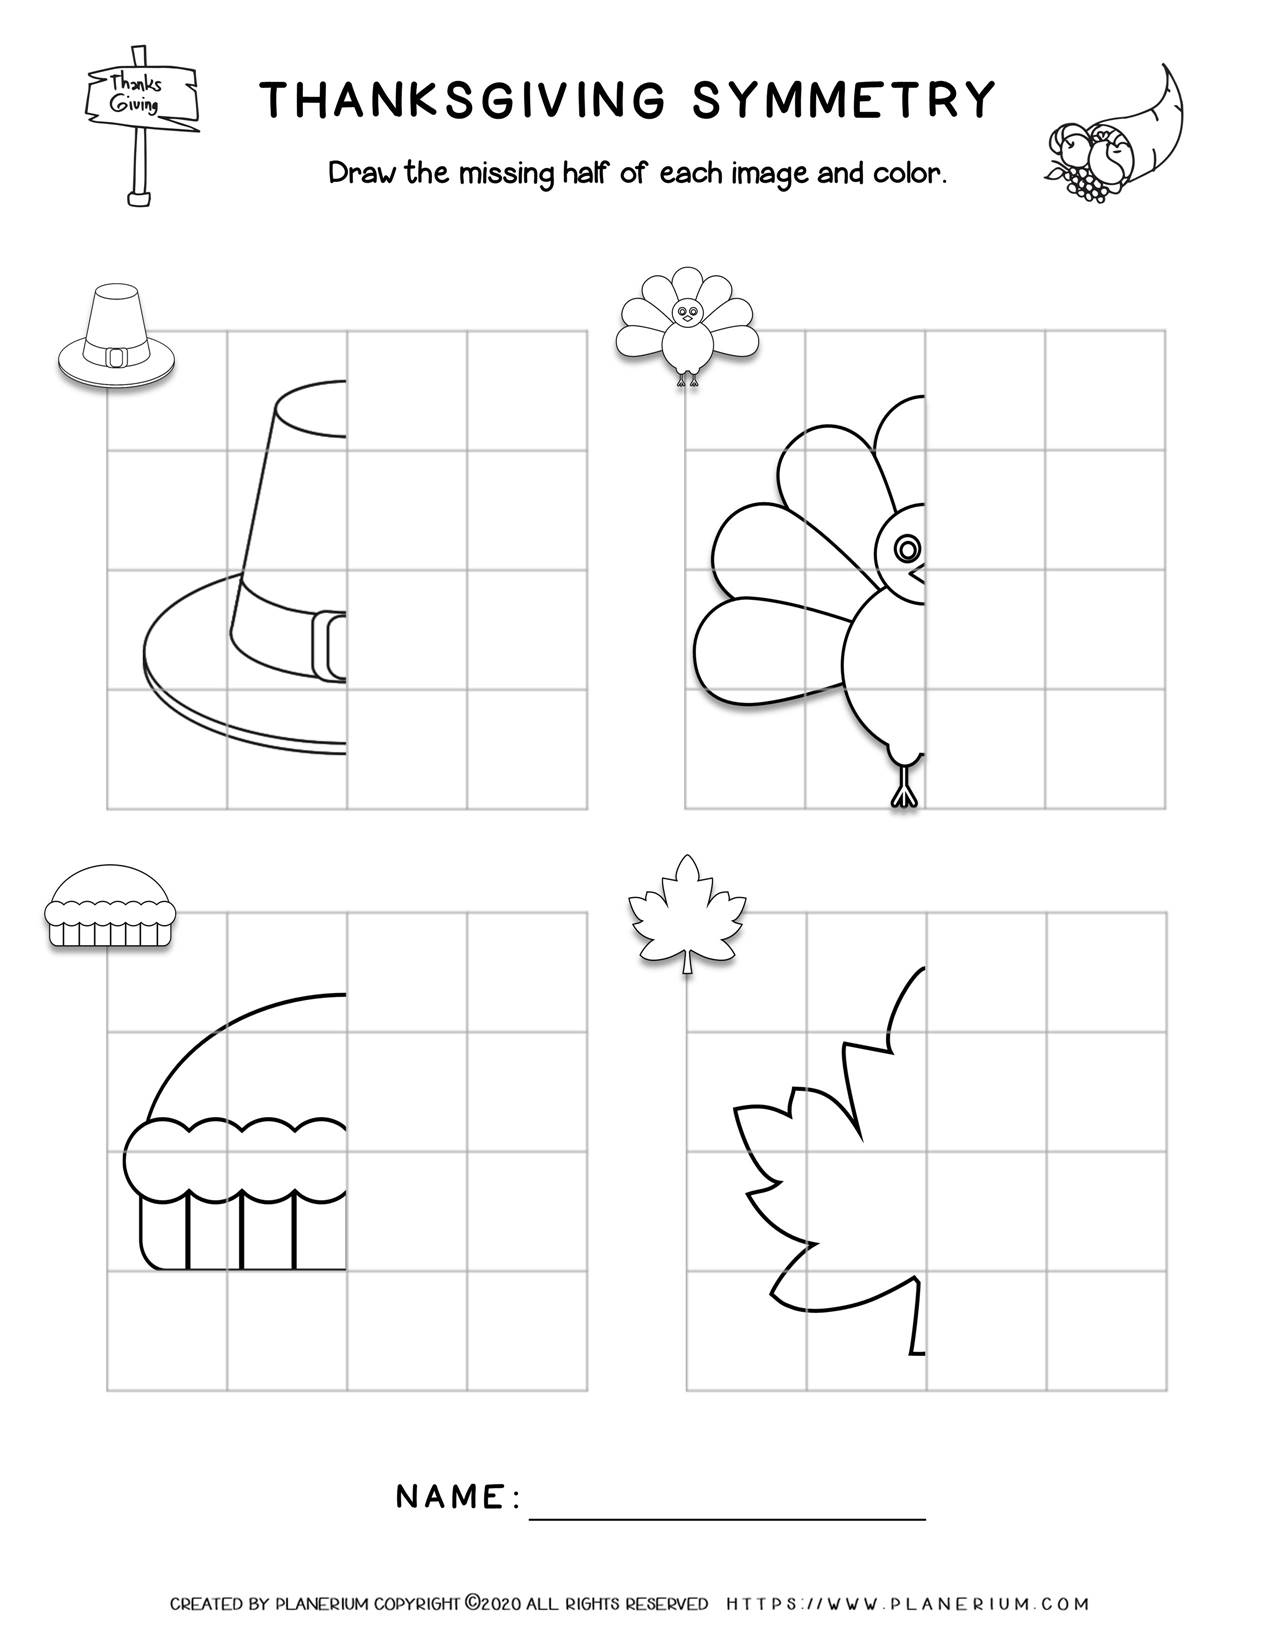 Worksheets21 Thanksgiving Symmetry Drawing